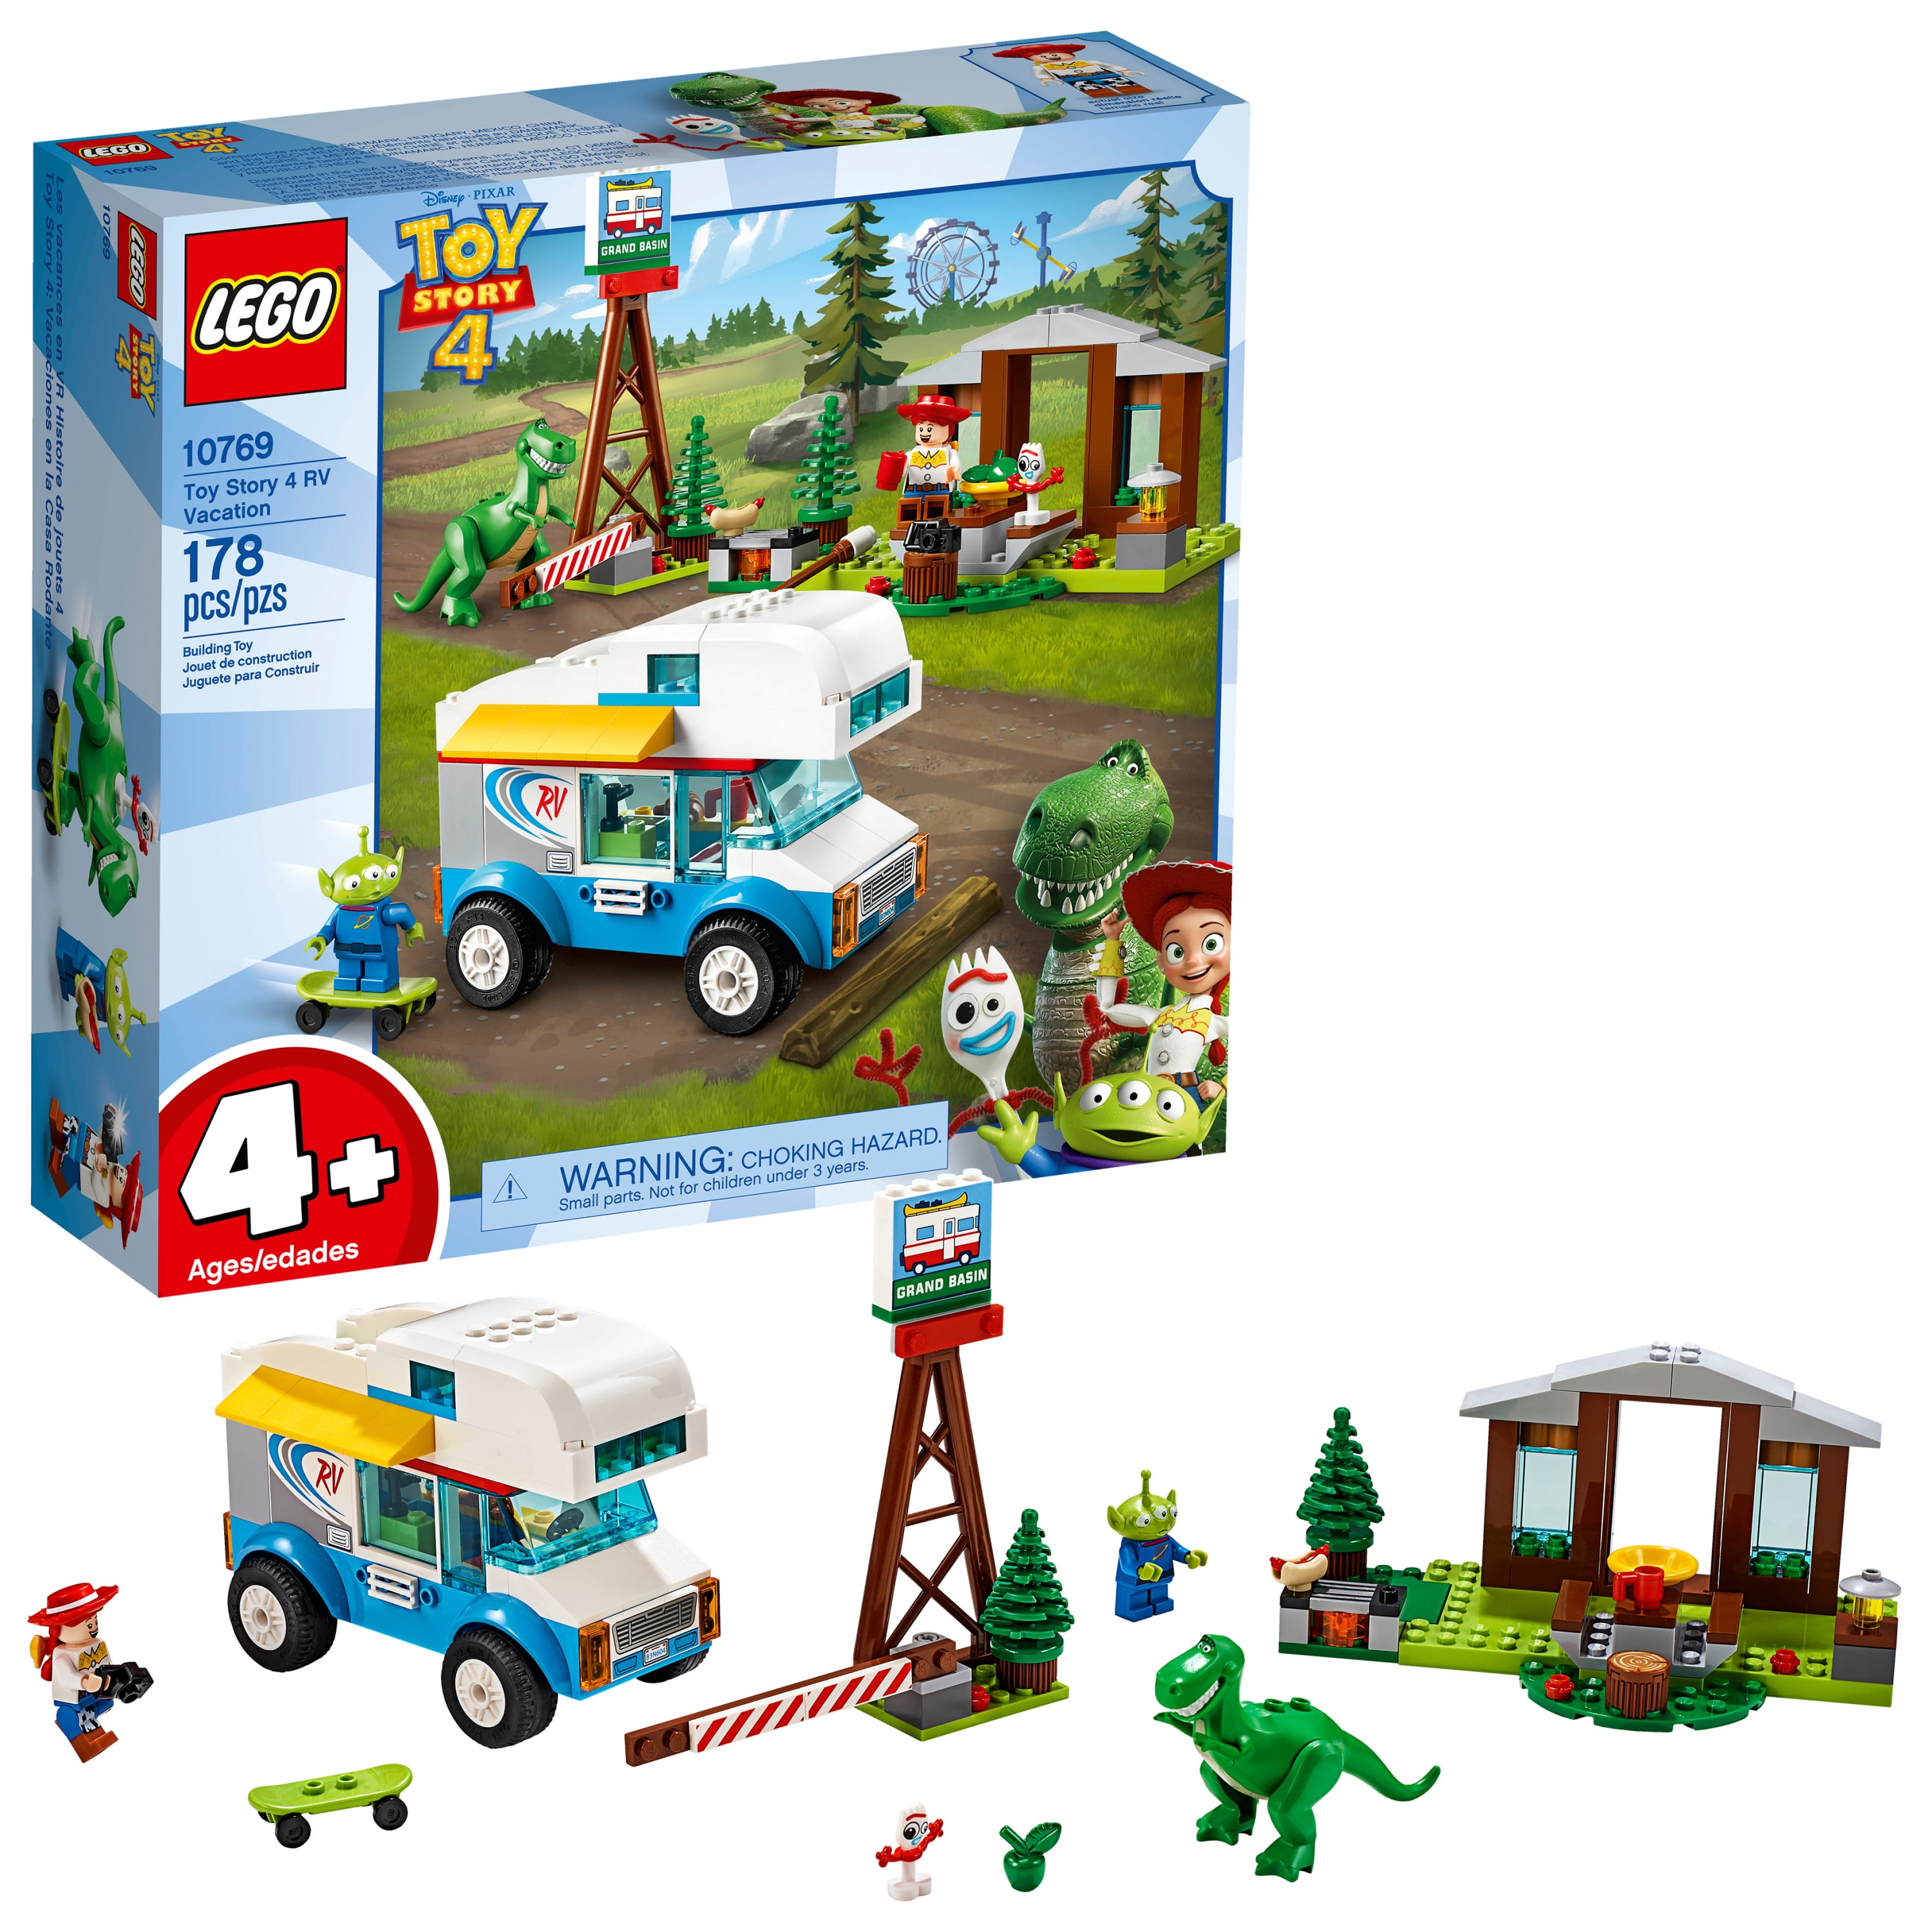 10769 LEGO Toy Story Toy Story 4 RV Vacation Set for sale online 